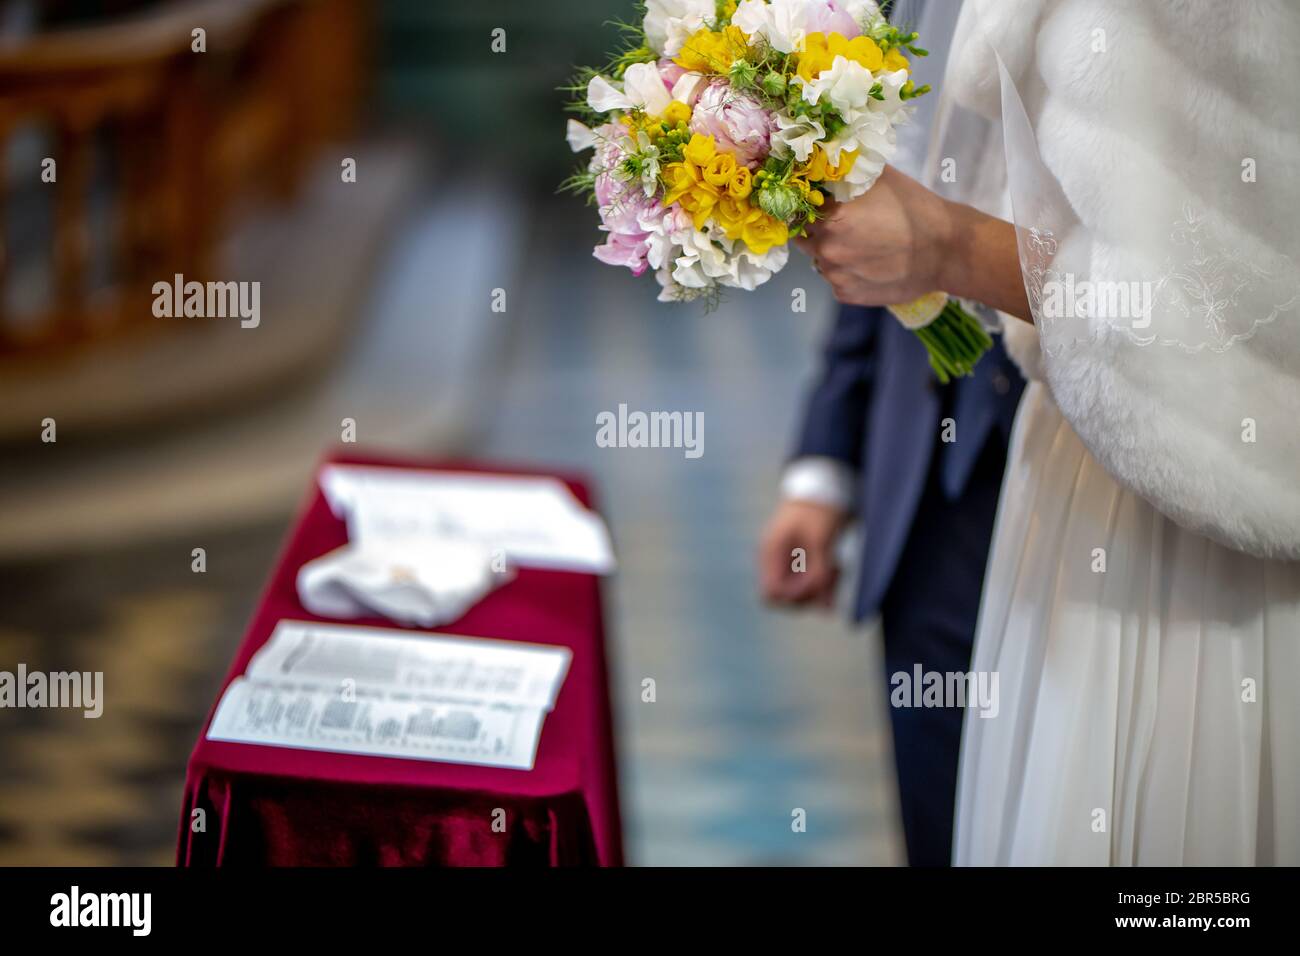 The bride holds a wedding bouquet of beautiful flowers in her hand. The bouquet consists of white, yellow and pink flowers. Marriage registration cert Stock Photo